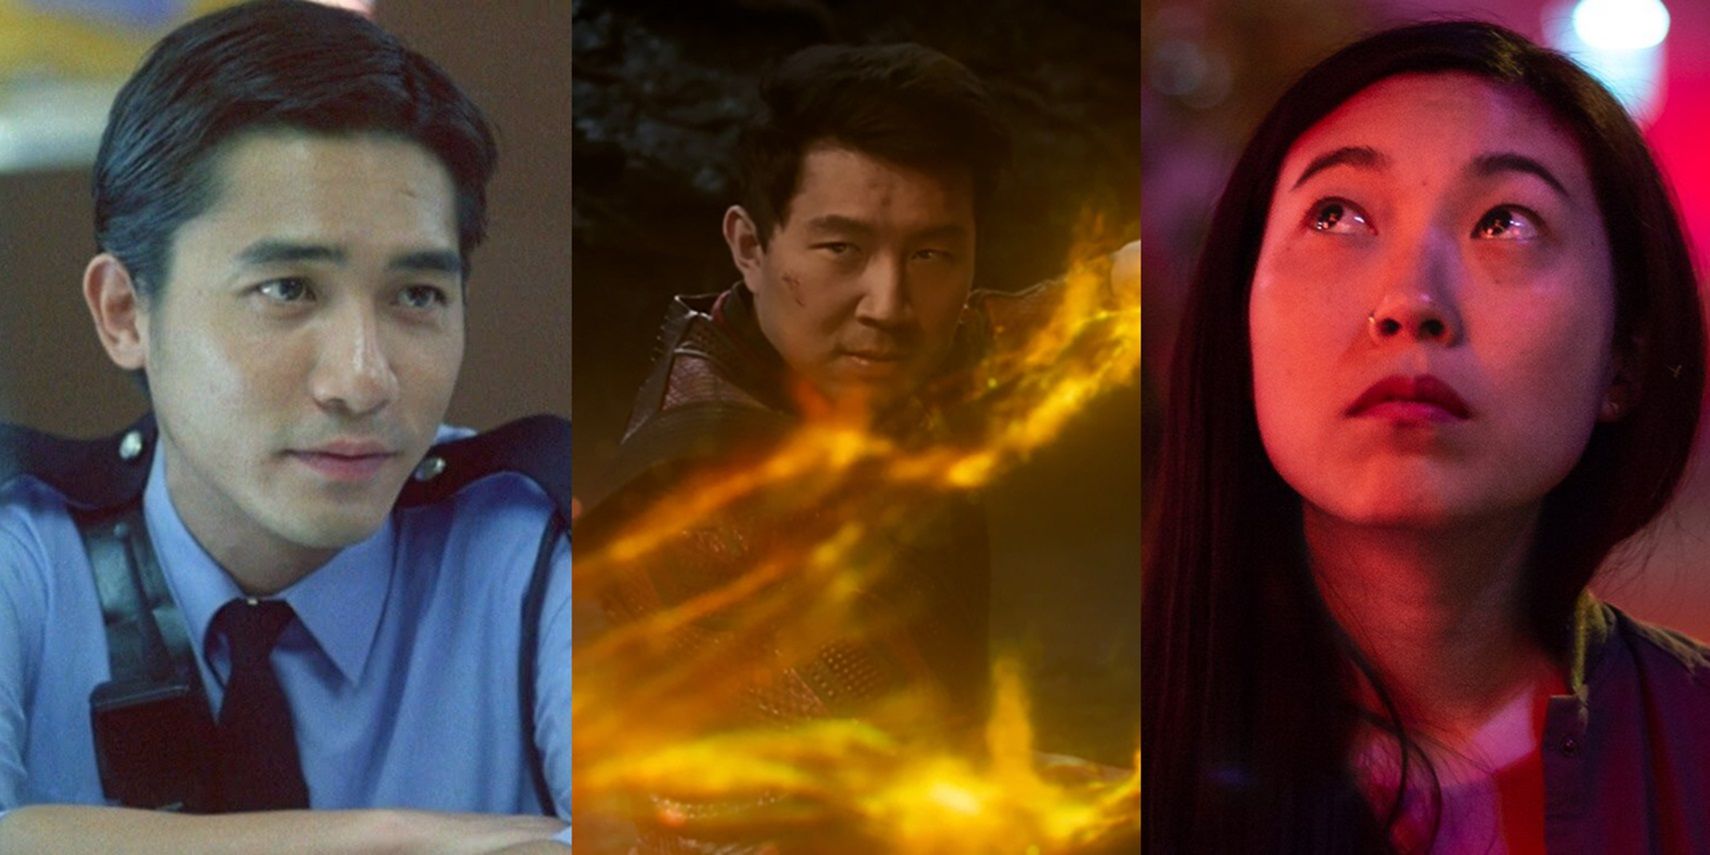 Split image of Tony Leung in Chungking Express, Simu Liu in Shang-Chi, and Awkwafina in The Farewell